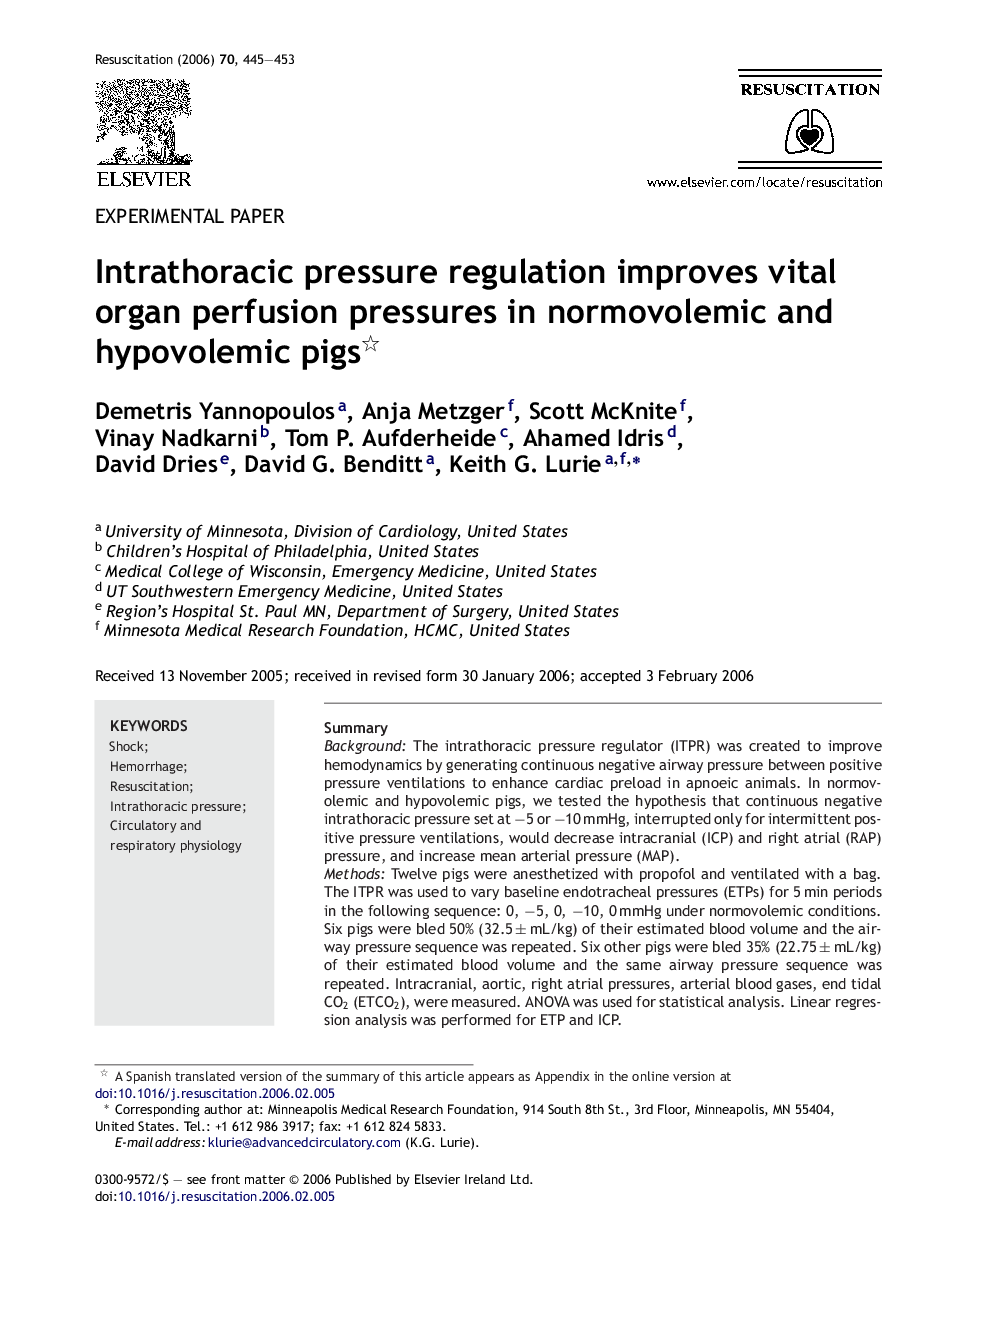 Intrathoracic pressure regulation improves vital organ perfusion pressures in normovolemic and hypovolemic pigs 